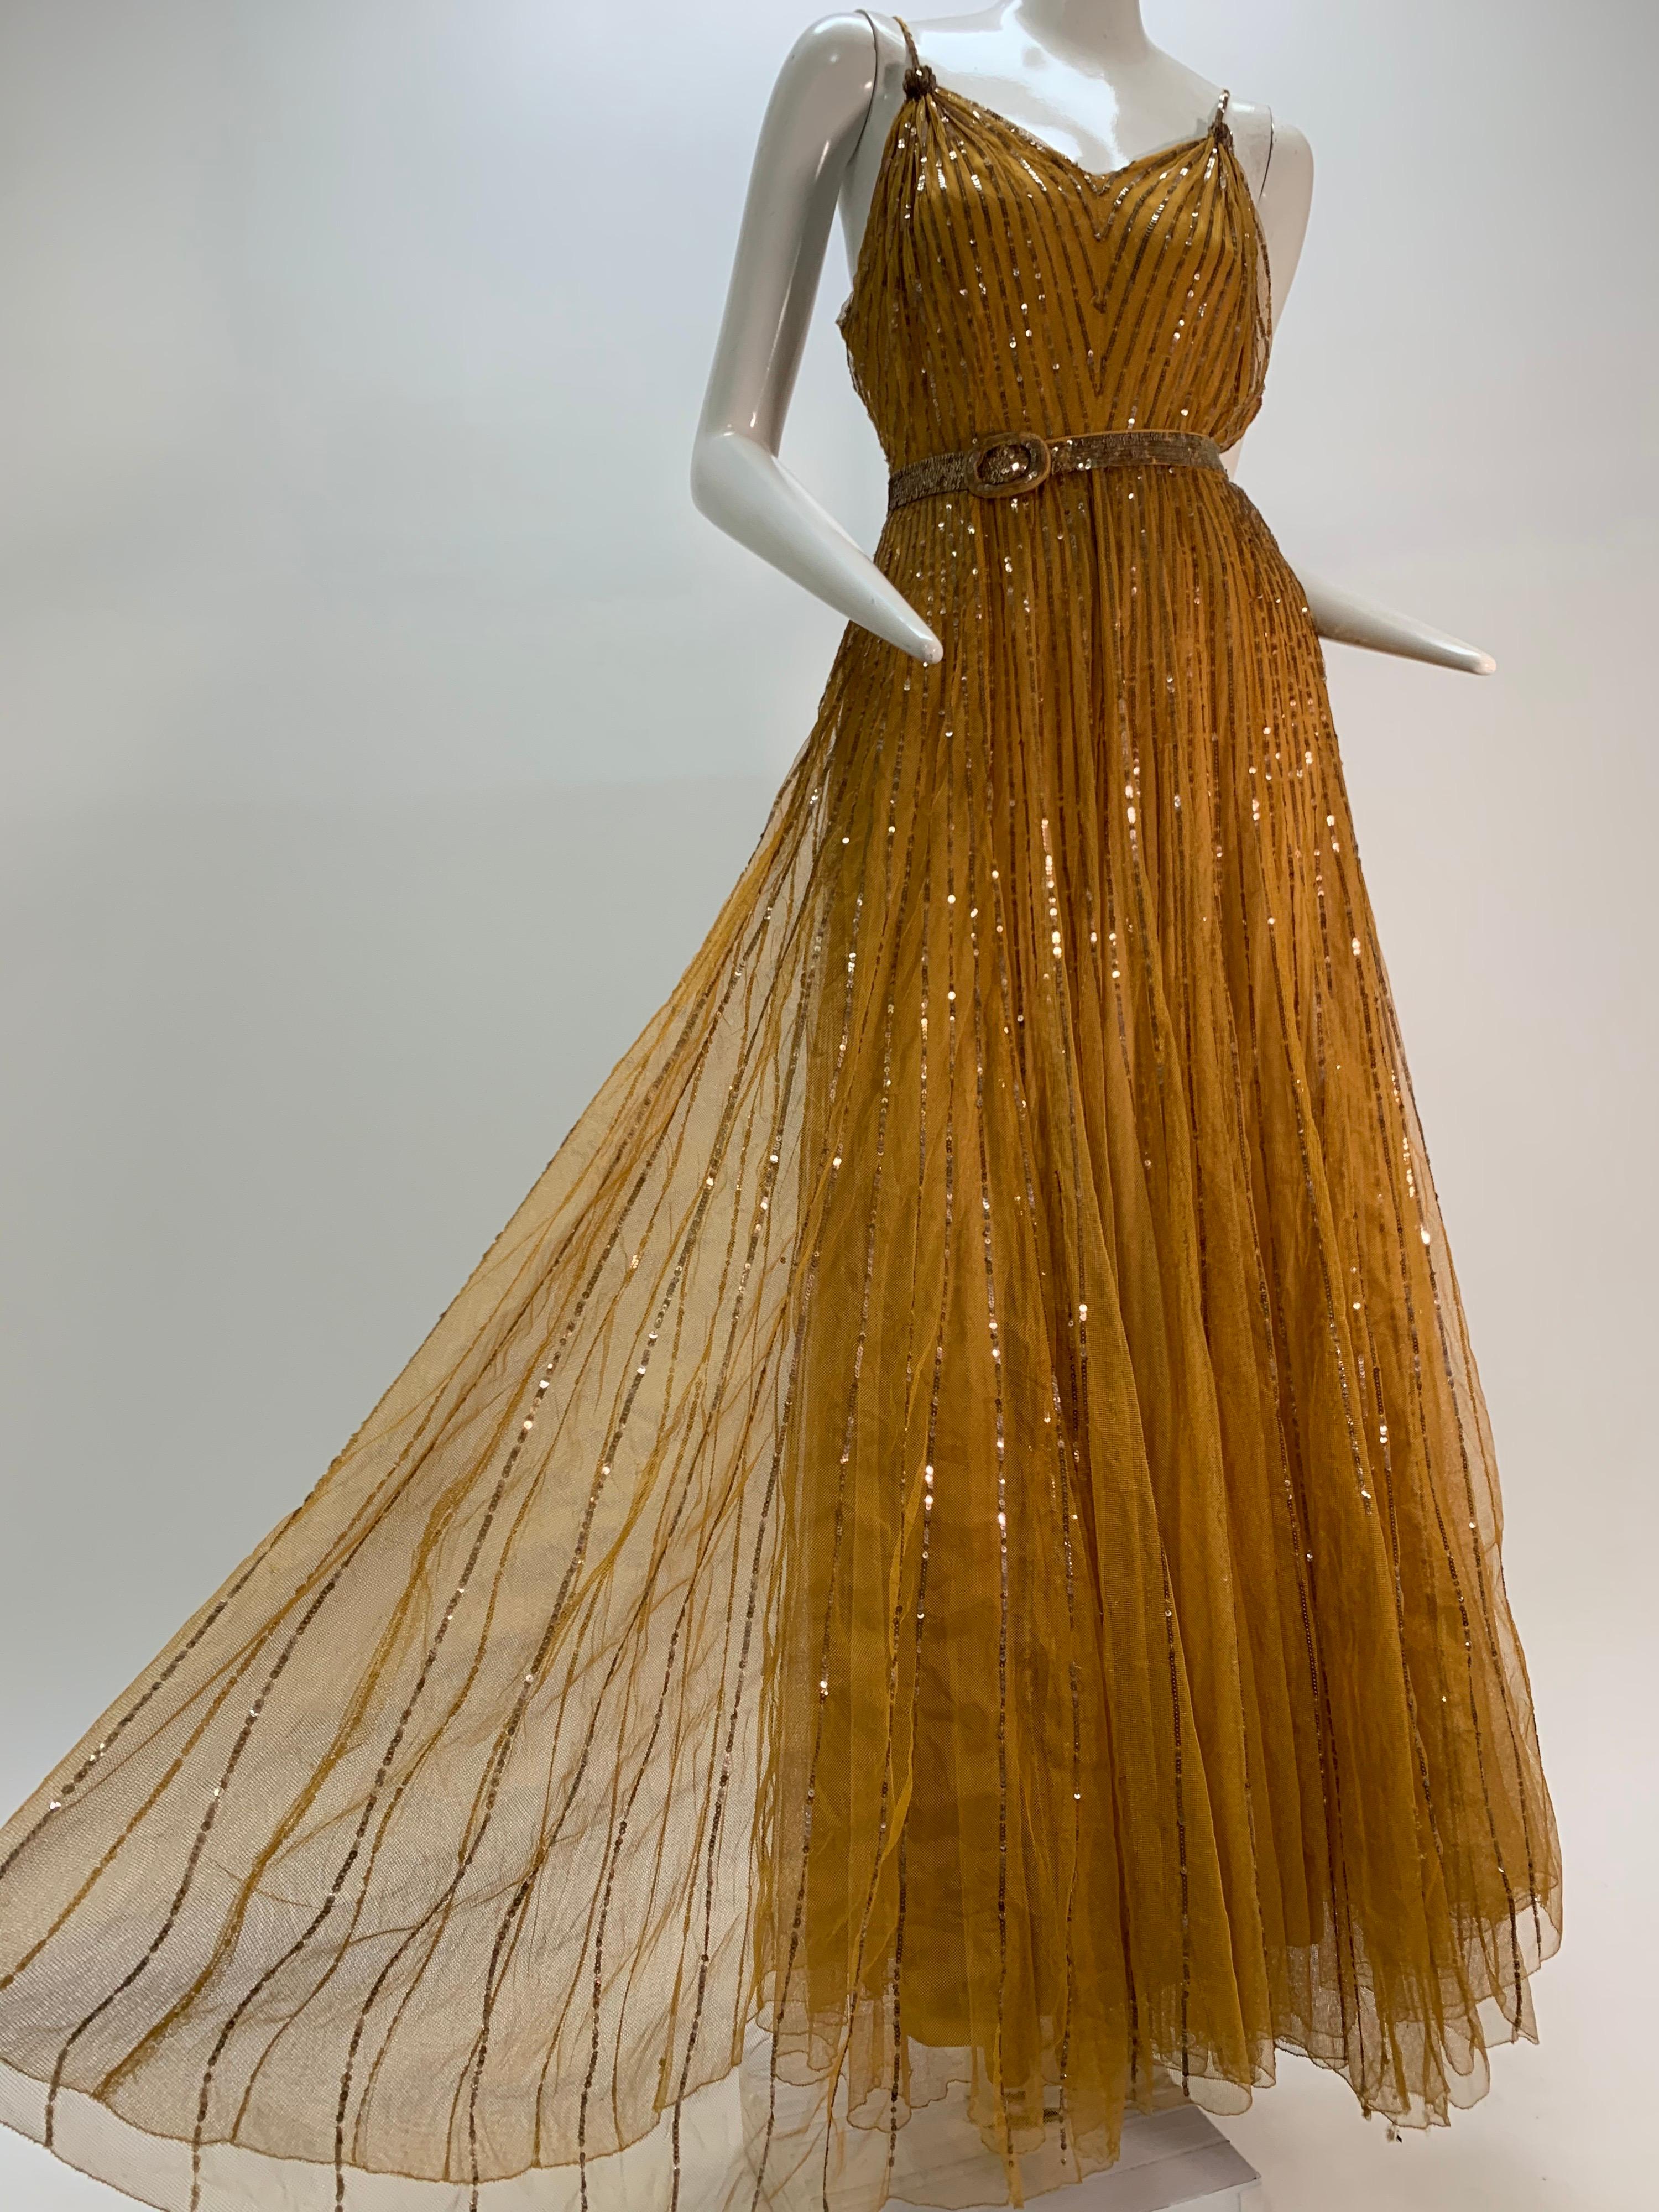 A divine 1930s Hollywood Starlet Gown: Spaghetti straps, gathered bust radiates down to the hem in golden sequined rays on gold silk tulle netting!  Gold satin lining fabric, side snaps and narrow, original, sequined belt included.  Unmarked as to